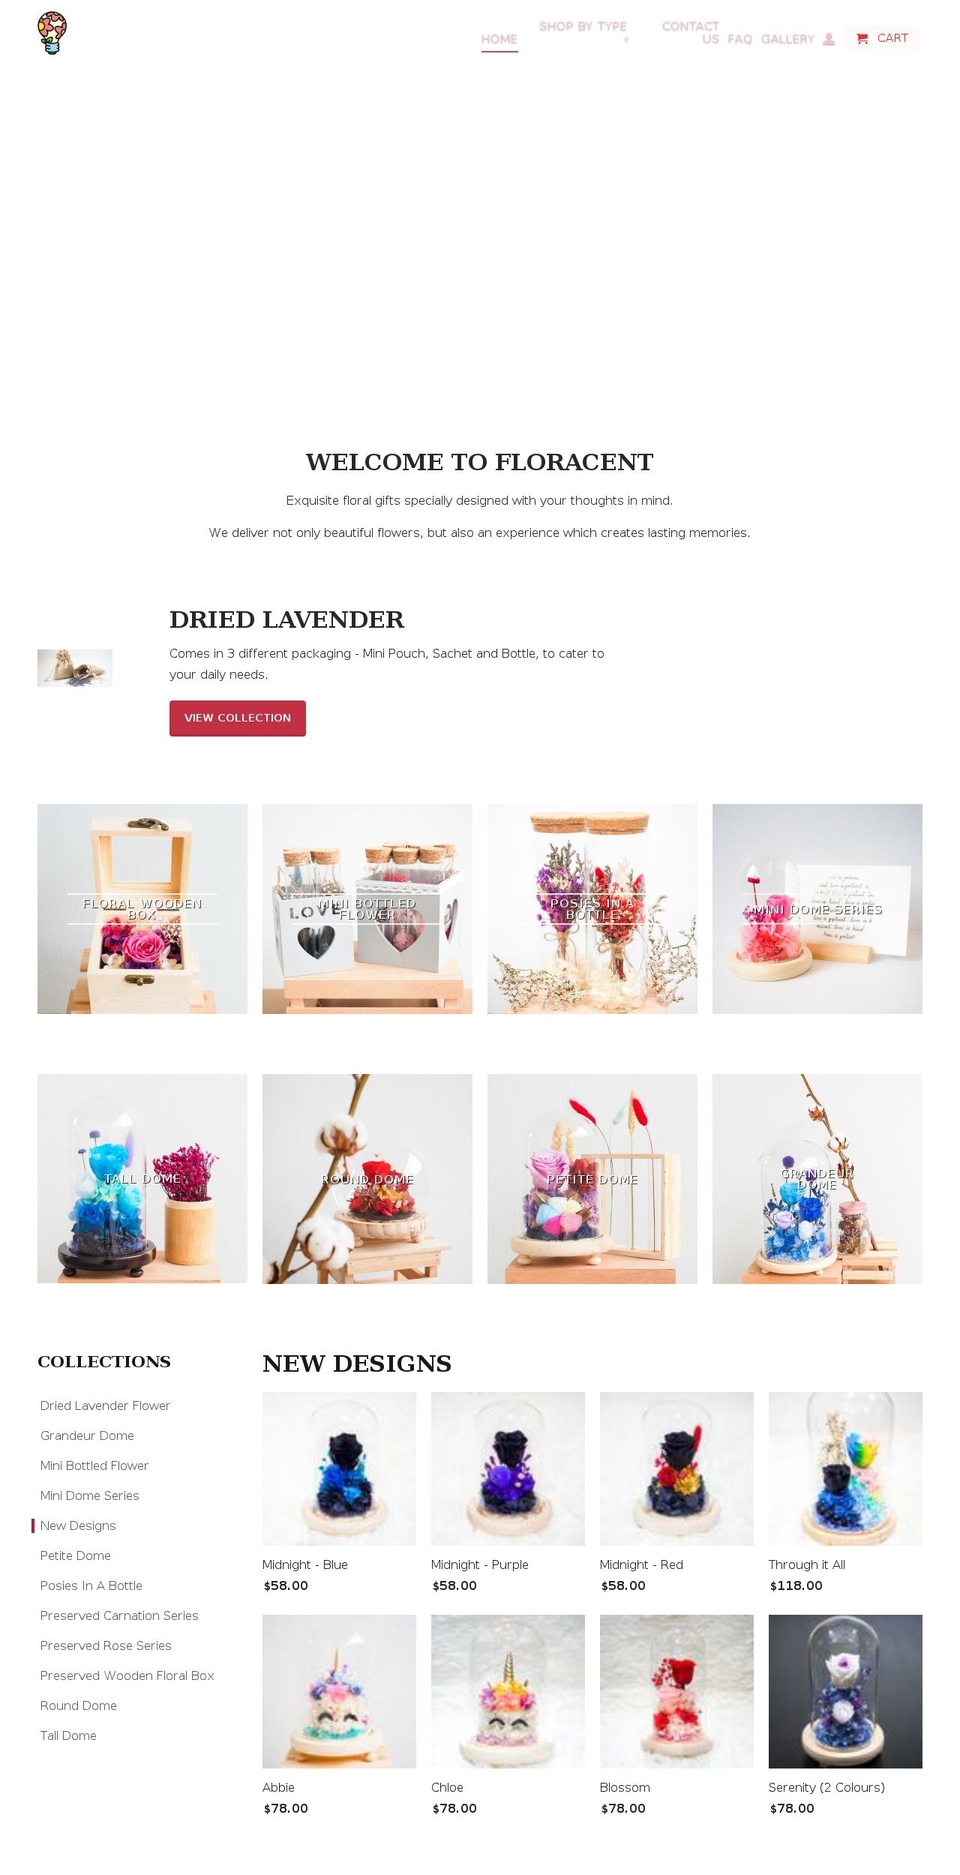 OOTS Support Shopify theme site example floracent.com